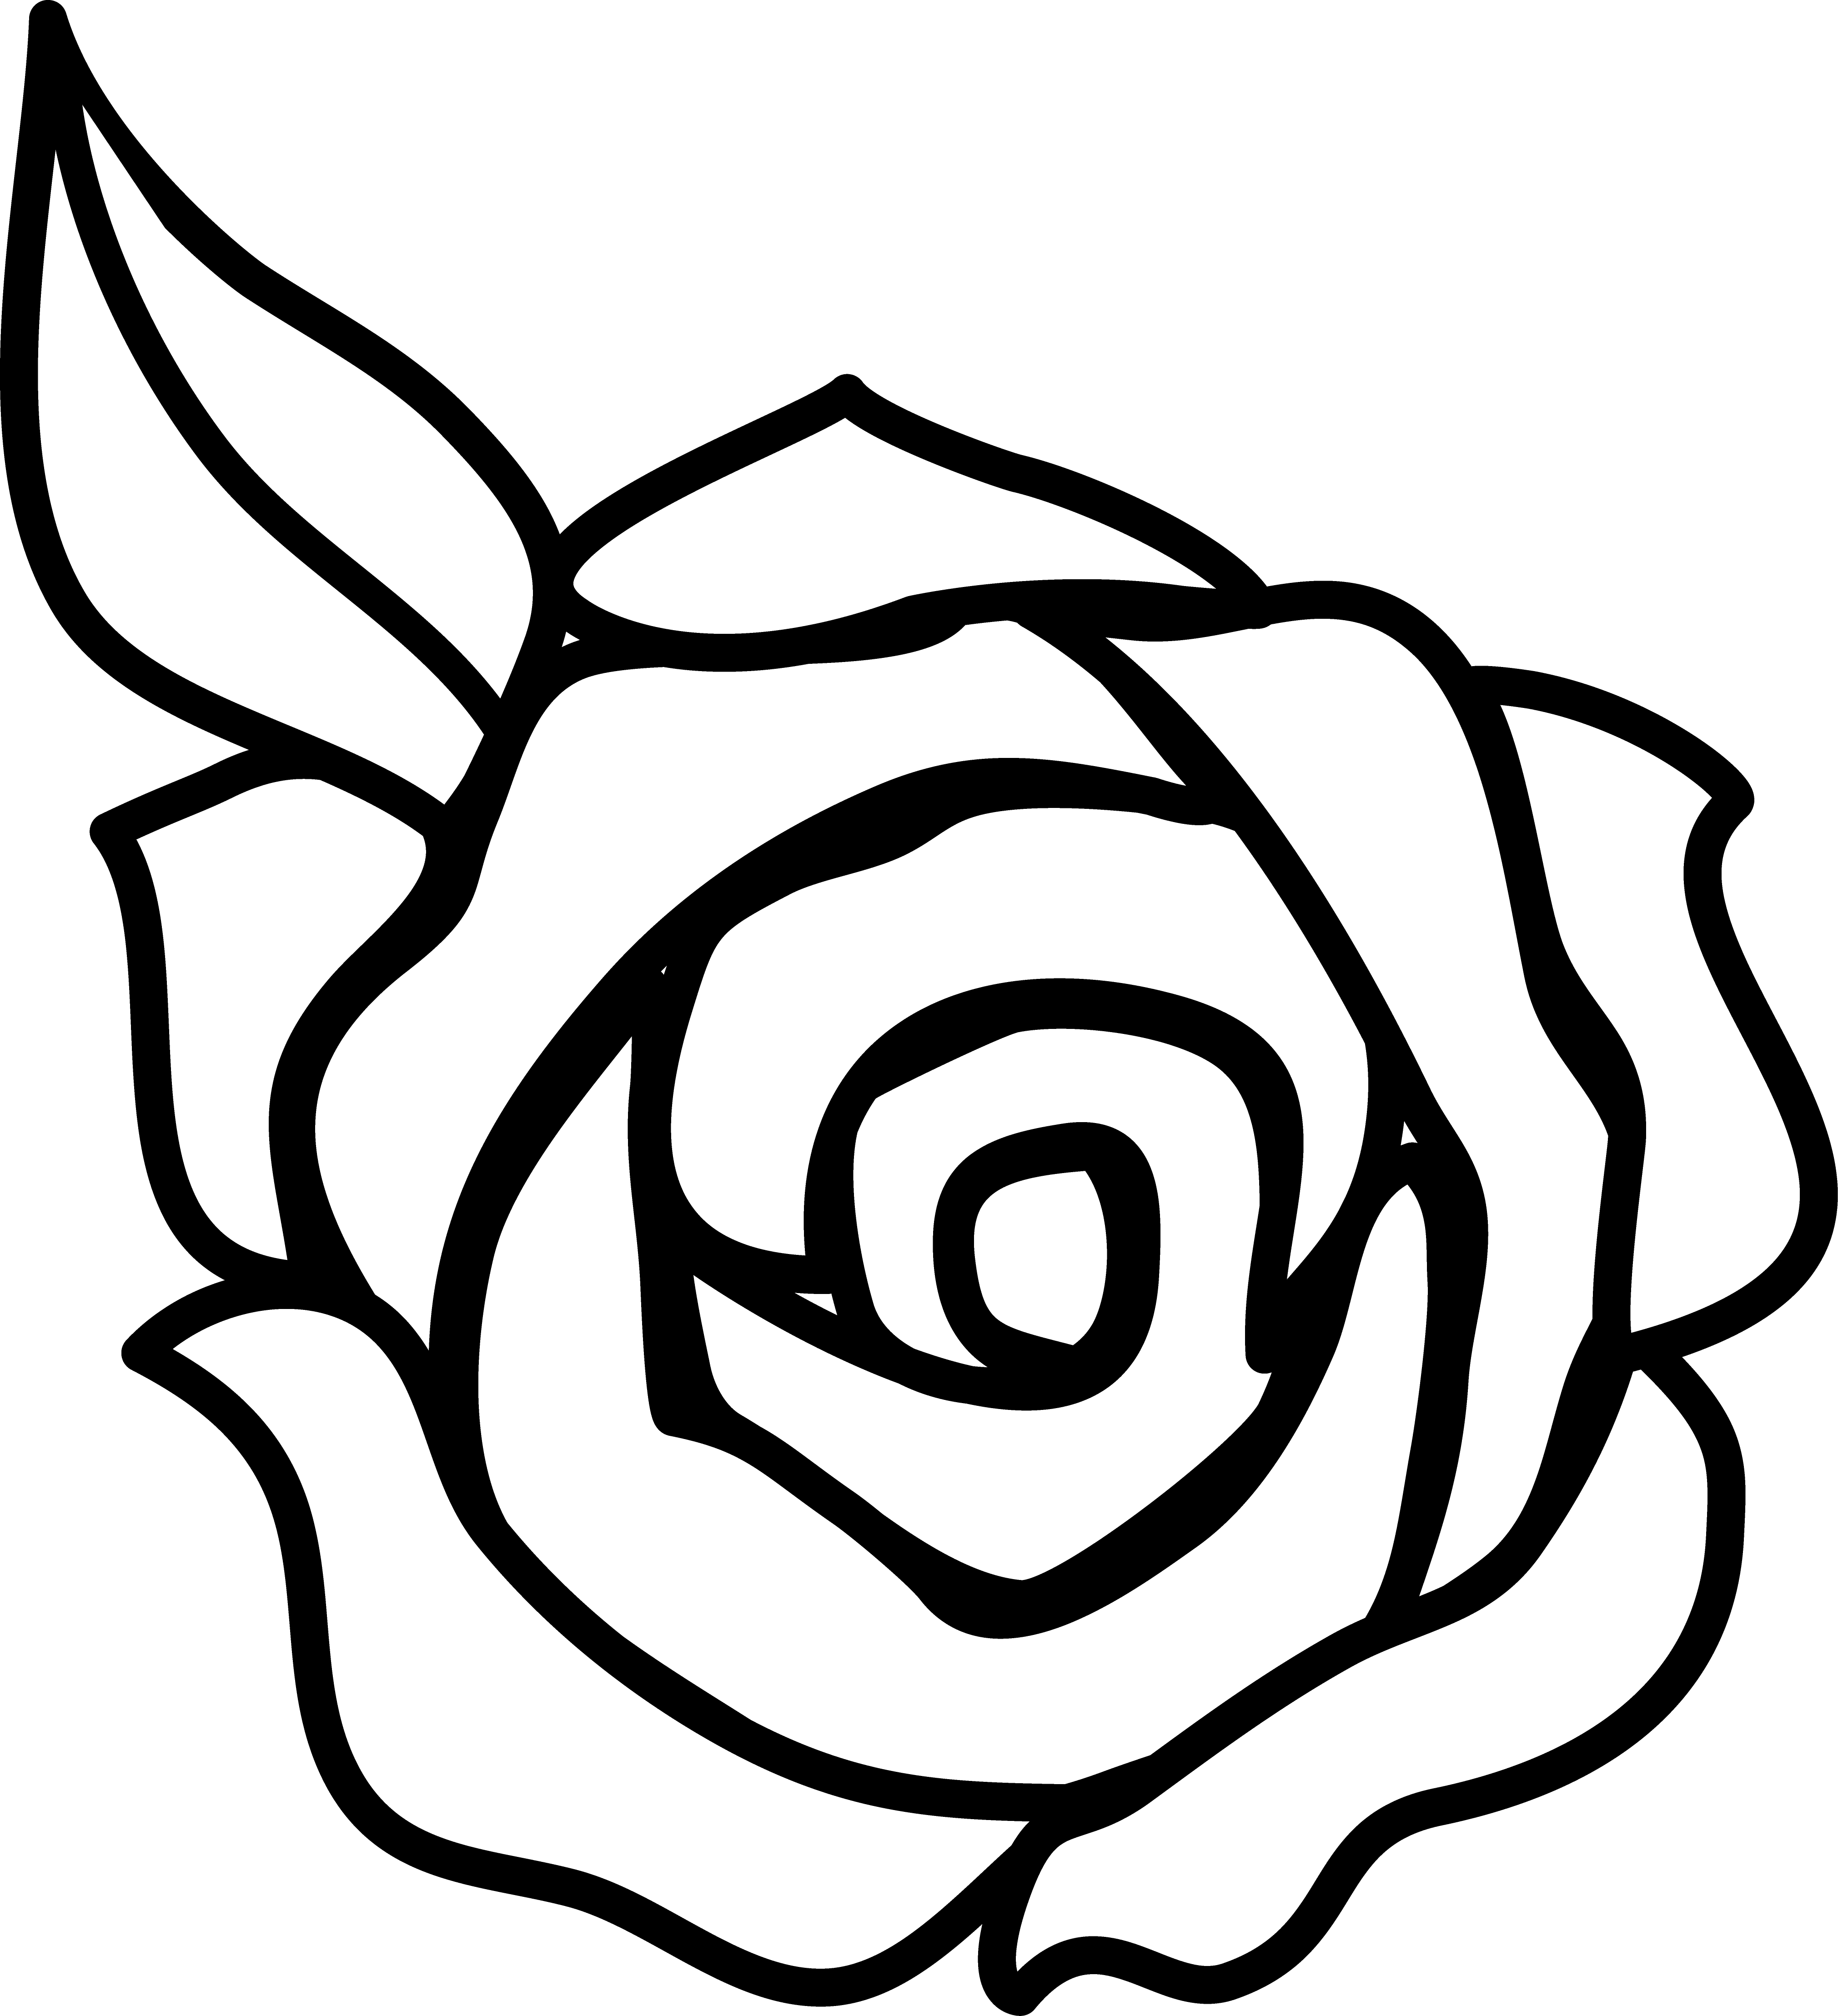 Lazy clipart sketch. Black and white rose